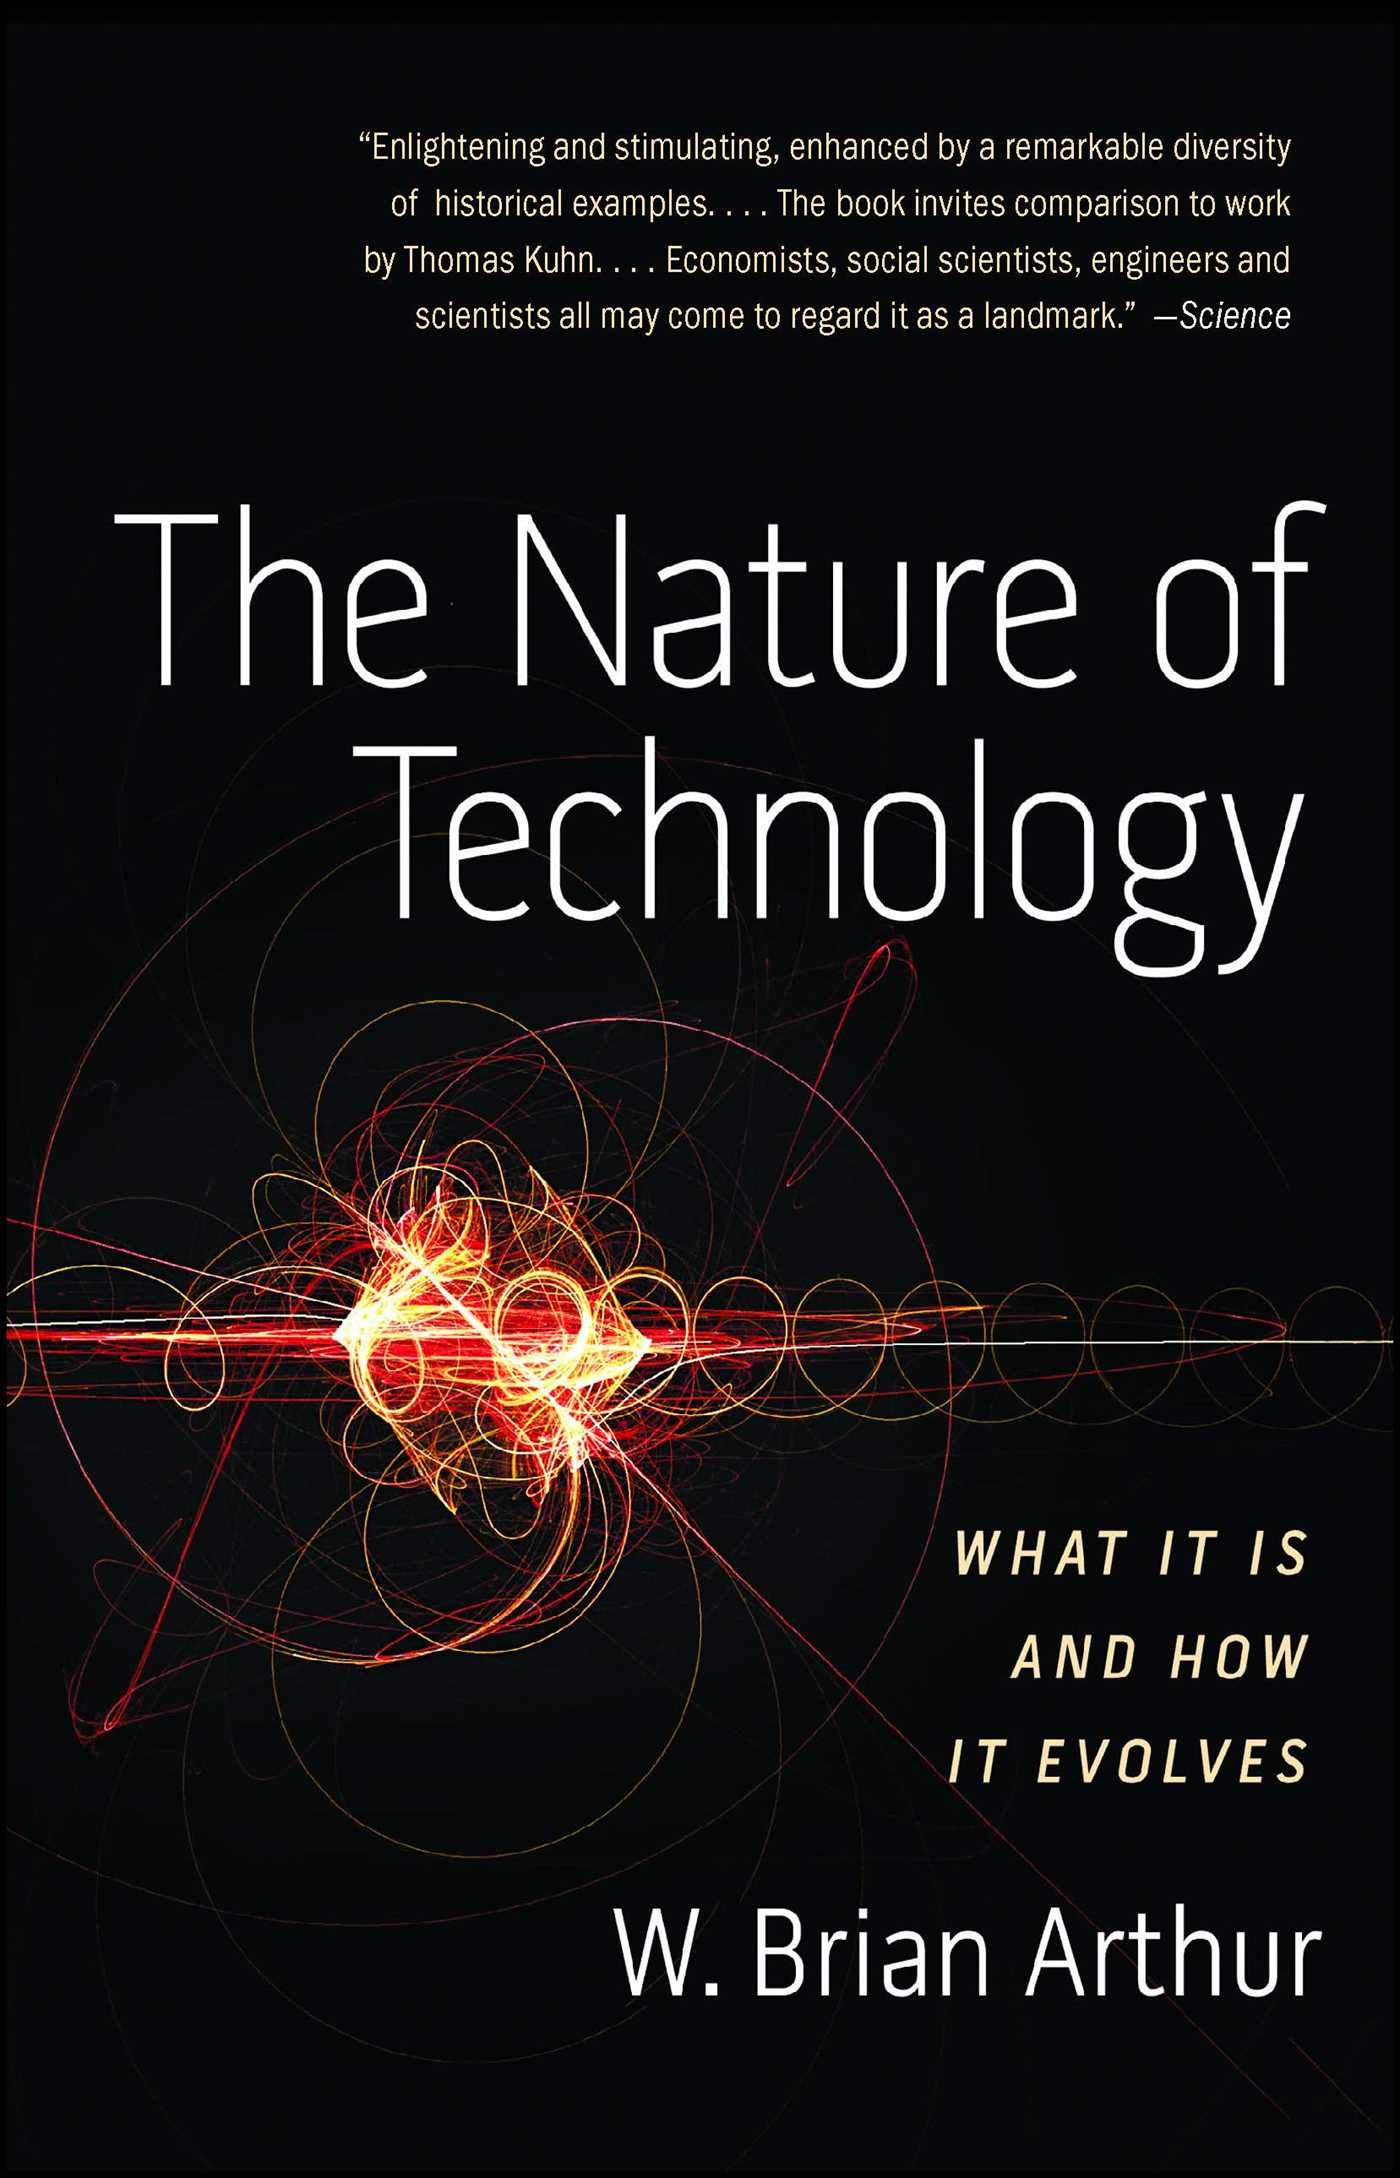 The Nature of Technology: What it is and How it Evolves by Brian Arthur